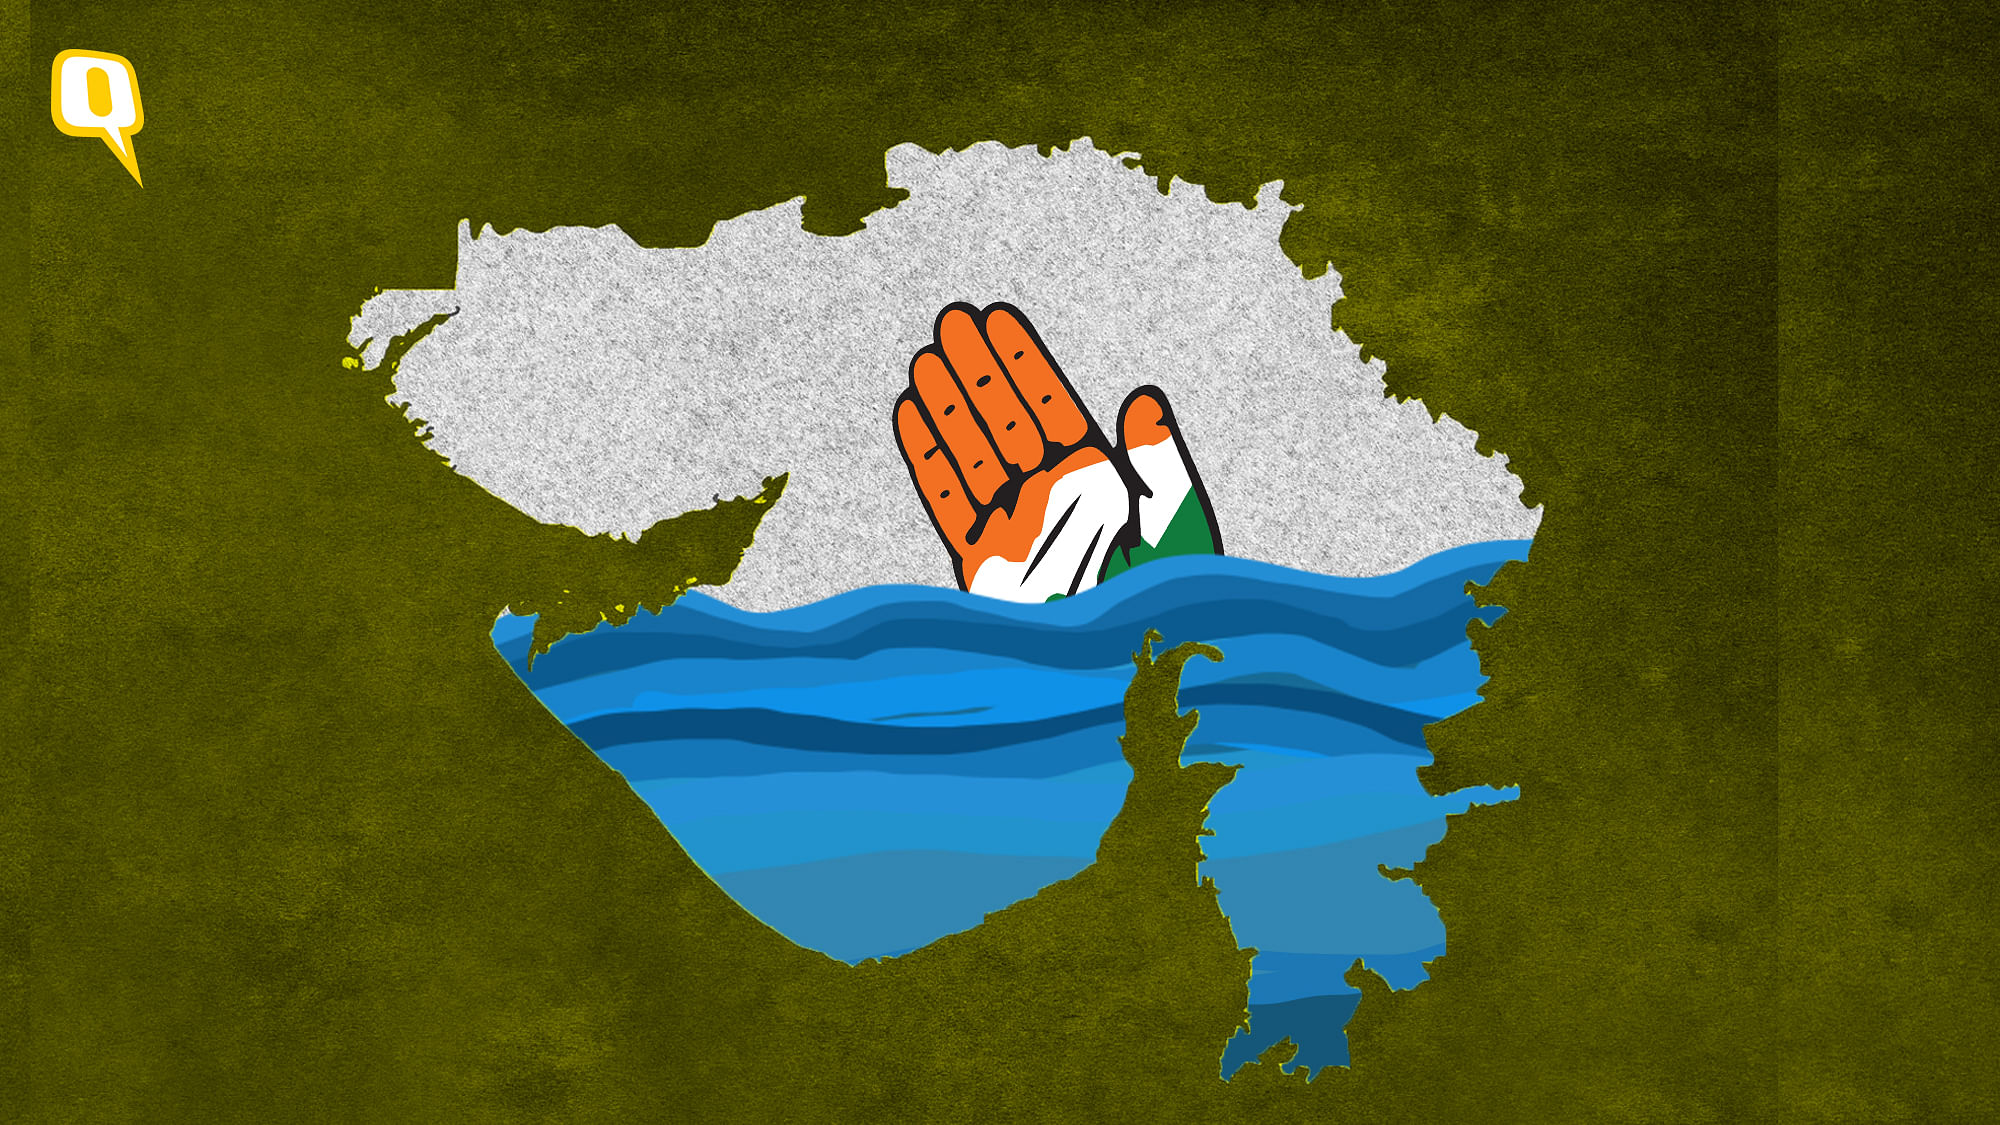 Where did the Congress go wrong in Surat?